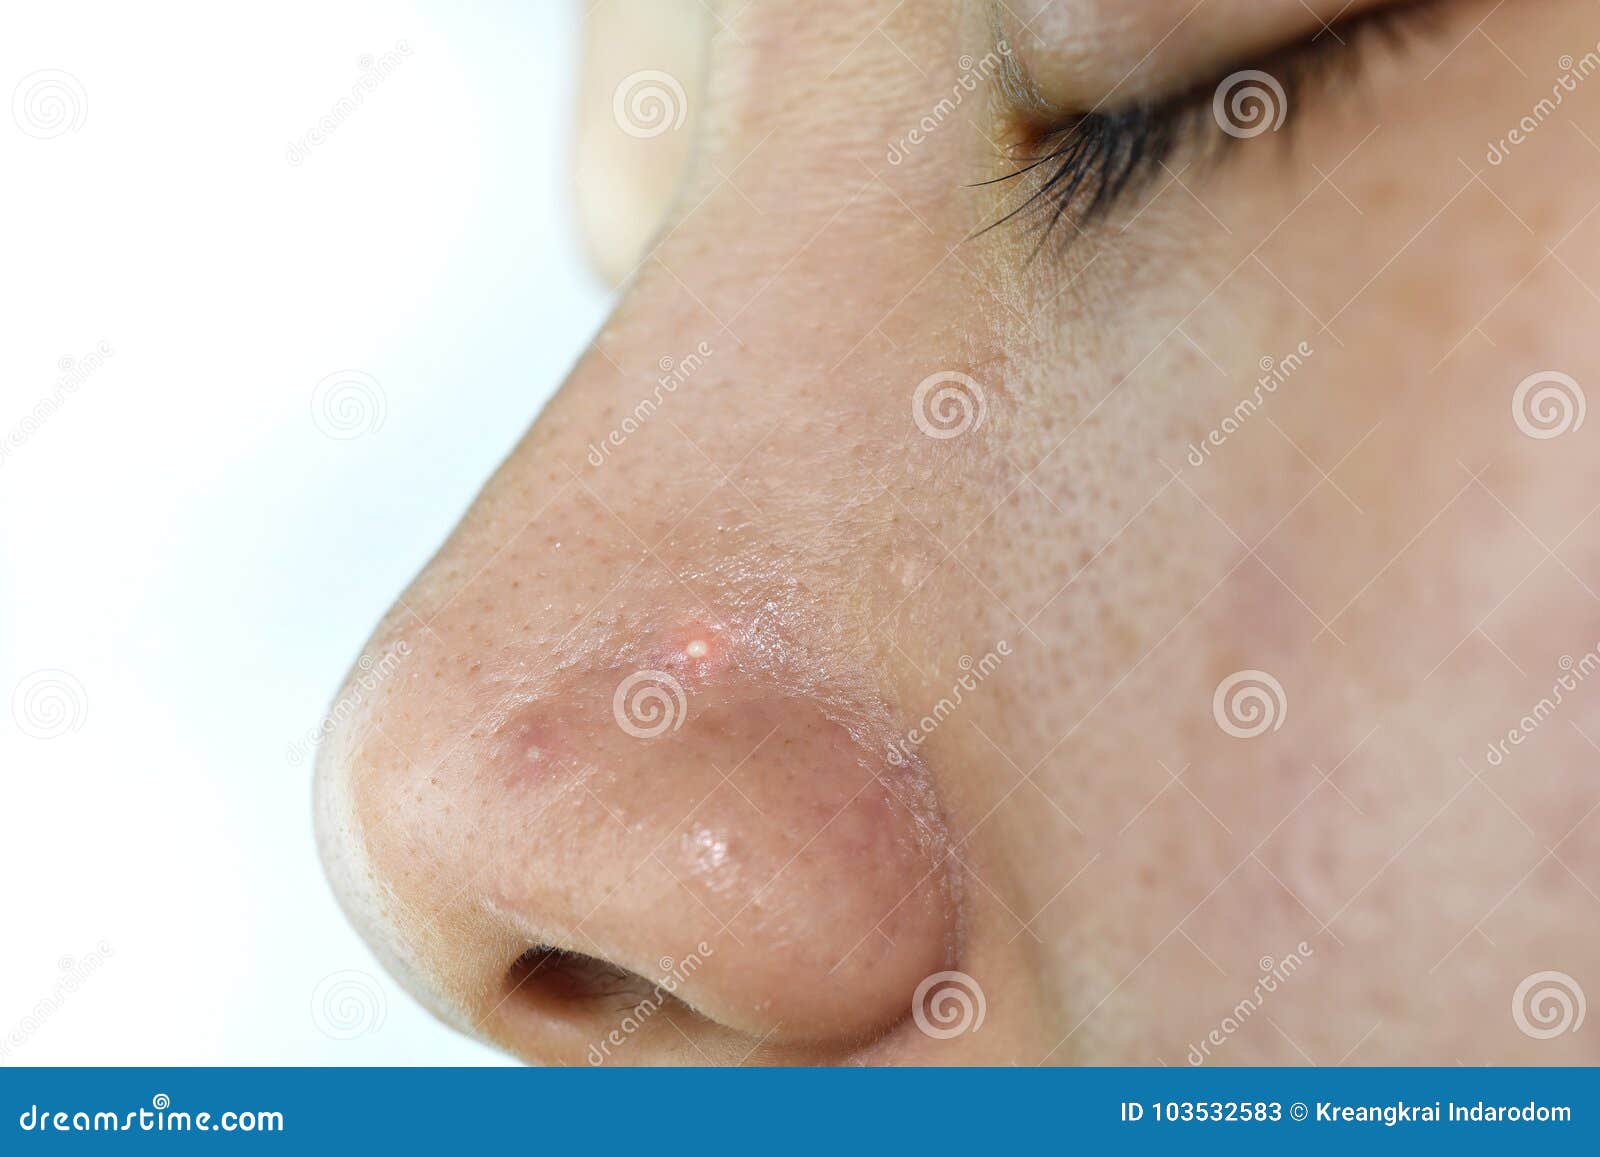 skin problem with acne diseases, close up woman scar face with whitehead pimples on nose.